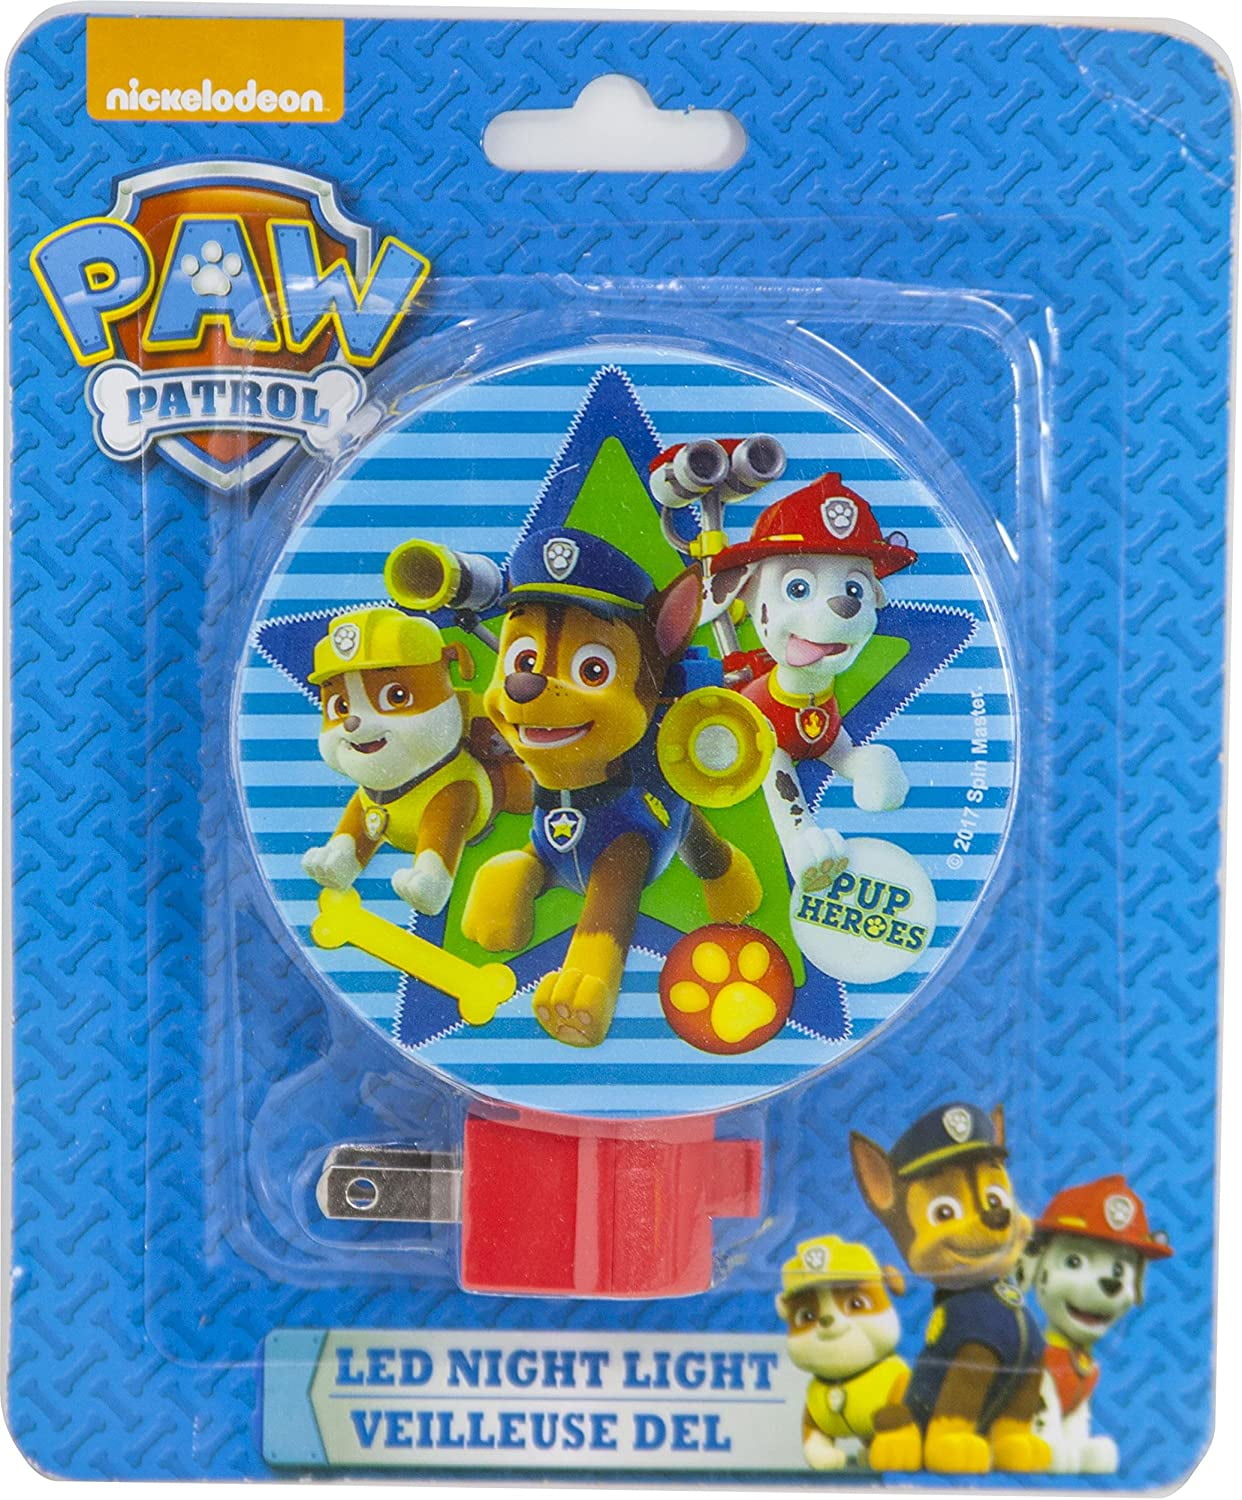 Nickelodeon PAW Patrol Blue LED Auto On/Off Night Light in the